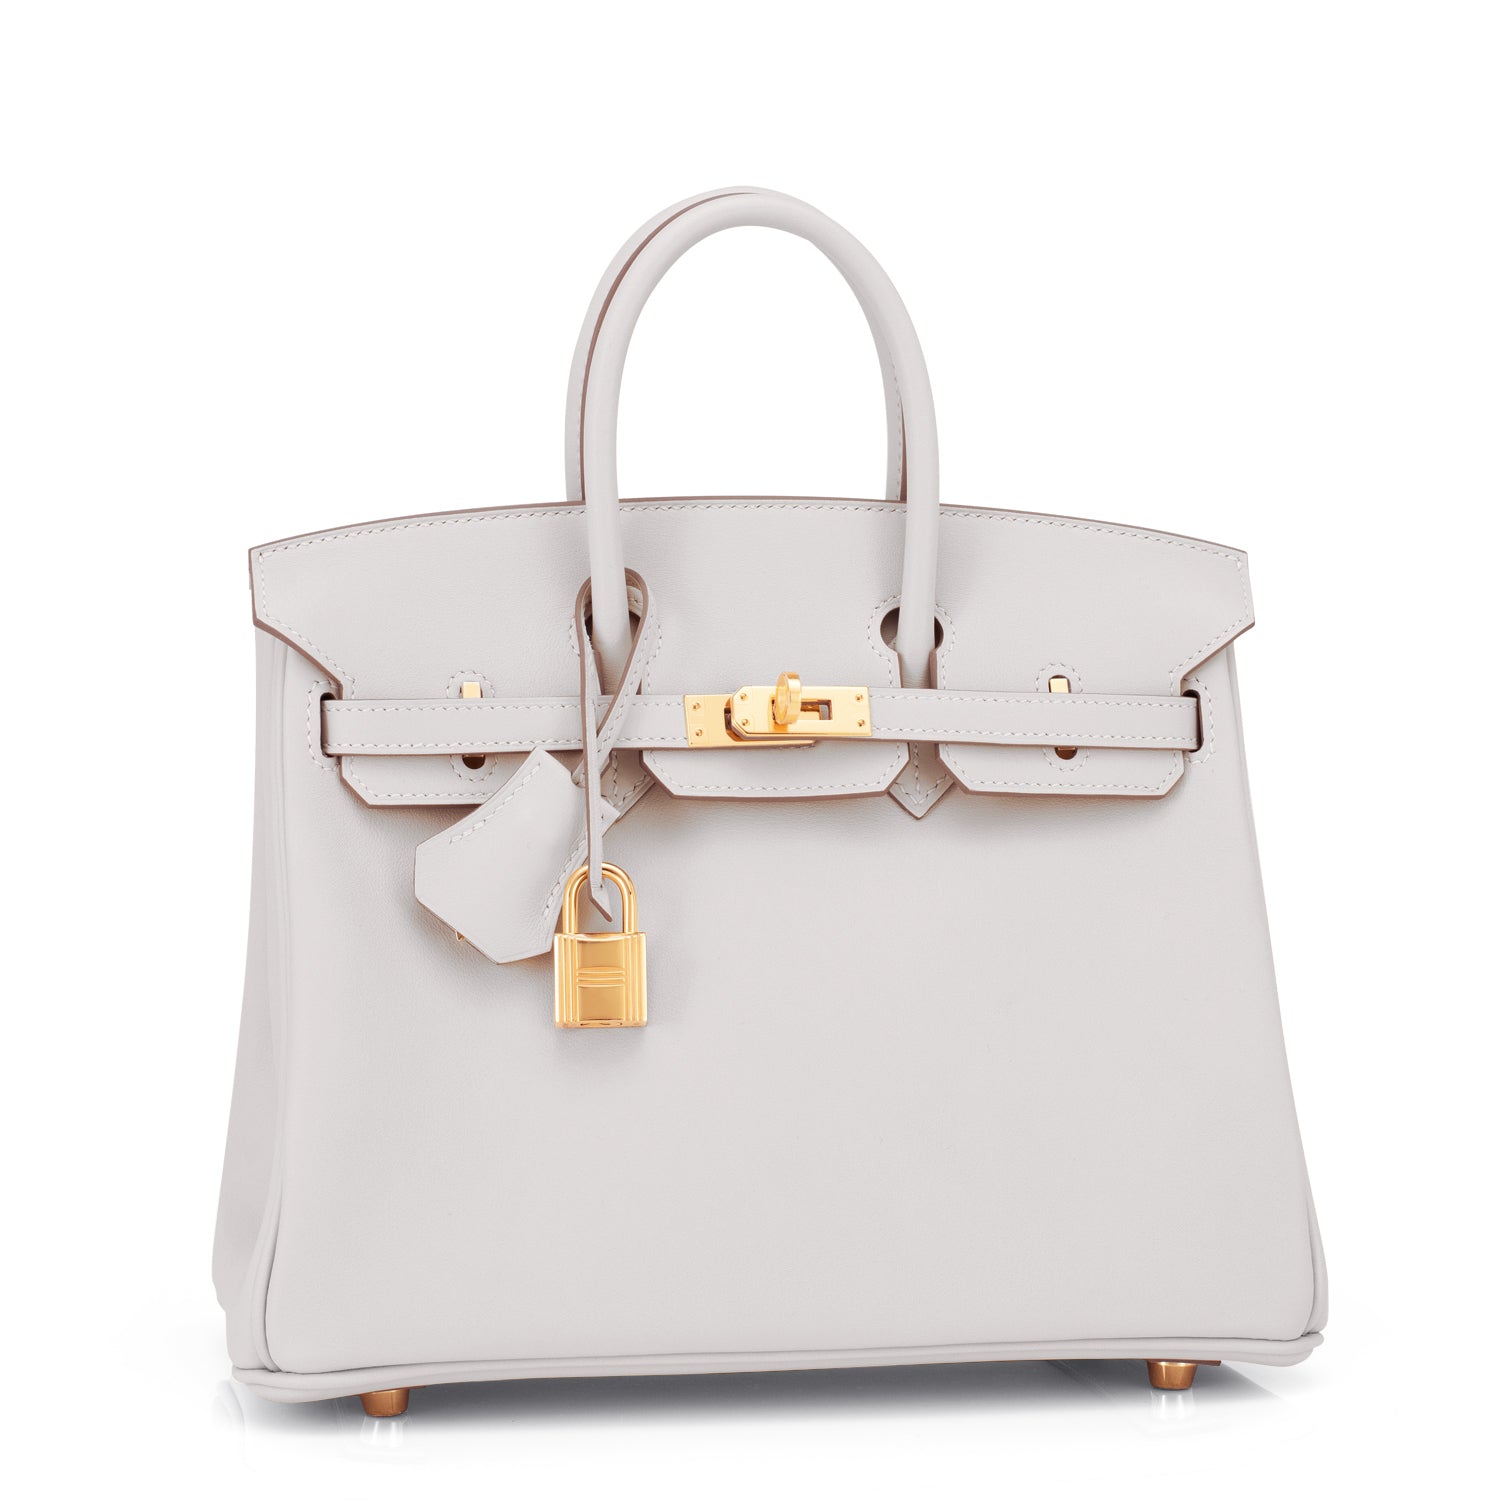 Hermes Birkin In and Out bag 25 White Swift leather Silver hardware